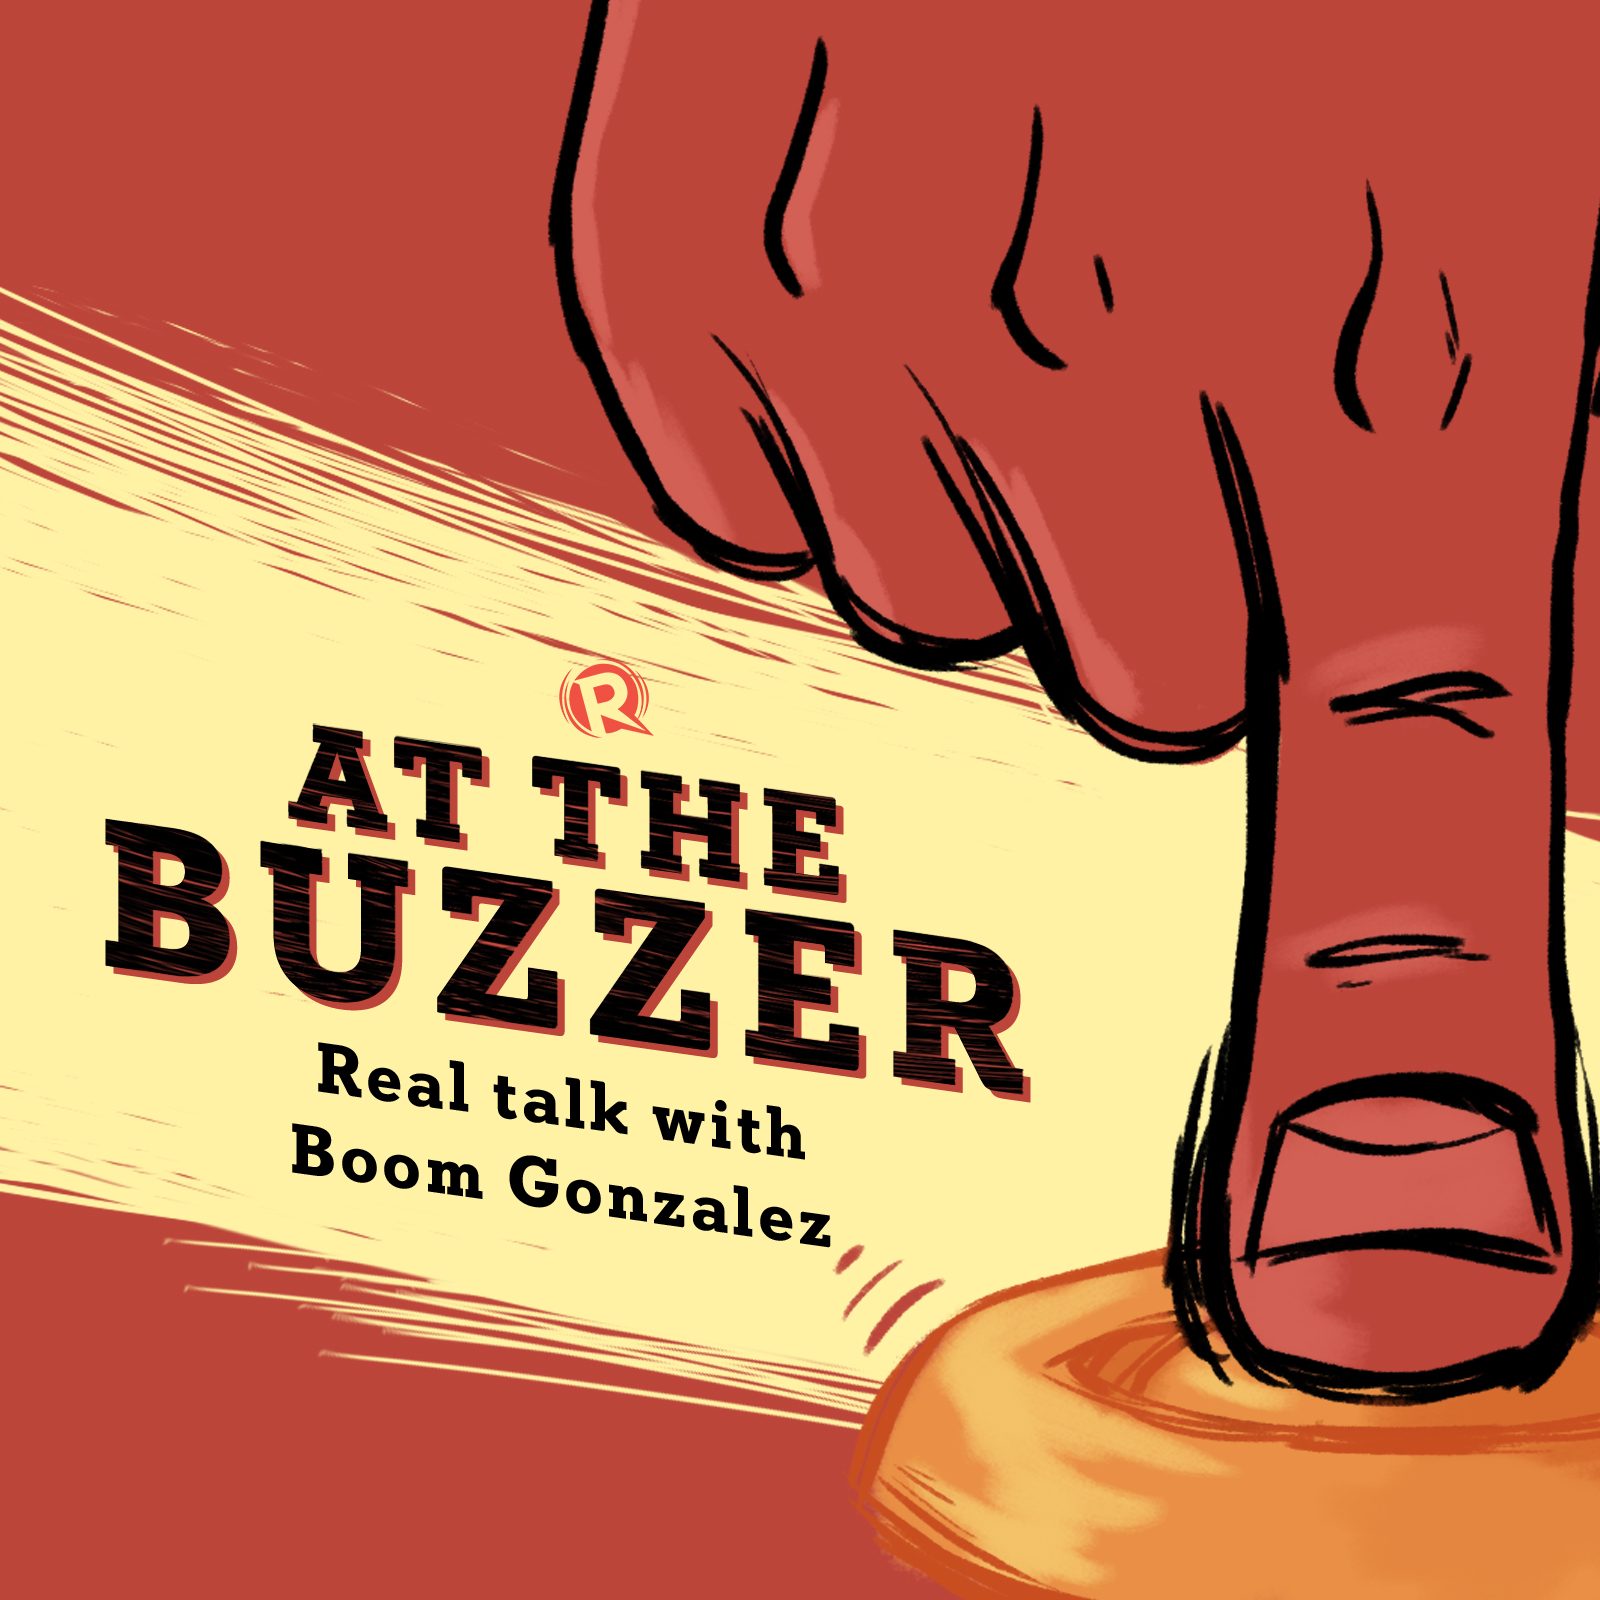 [PODCAST] At the Buzzer: Real talk with Boom Gonzalez